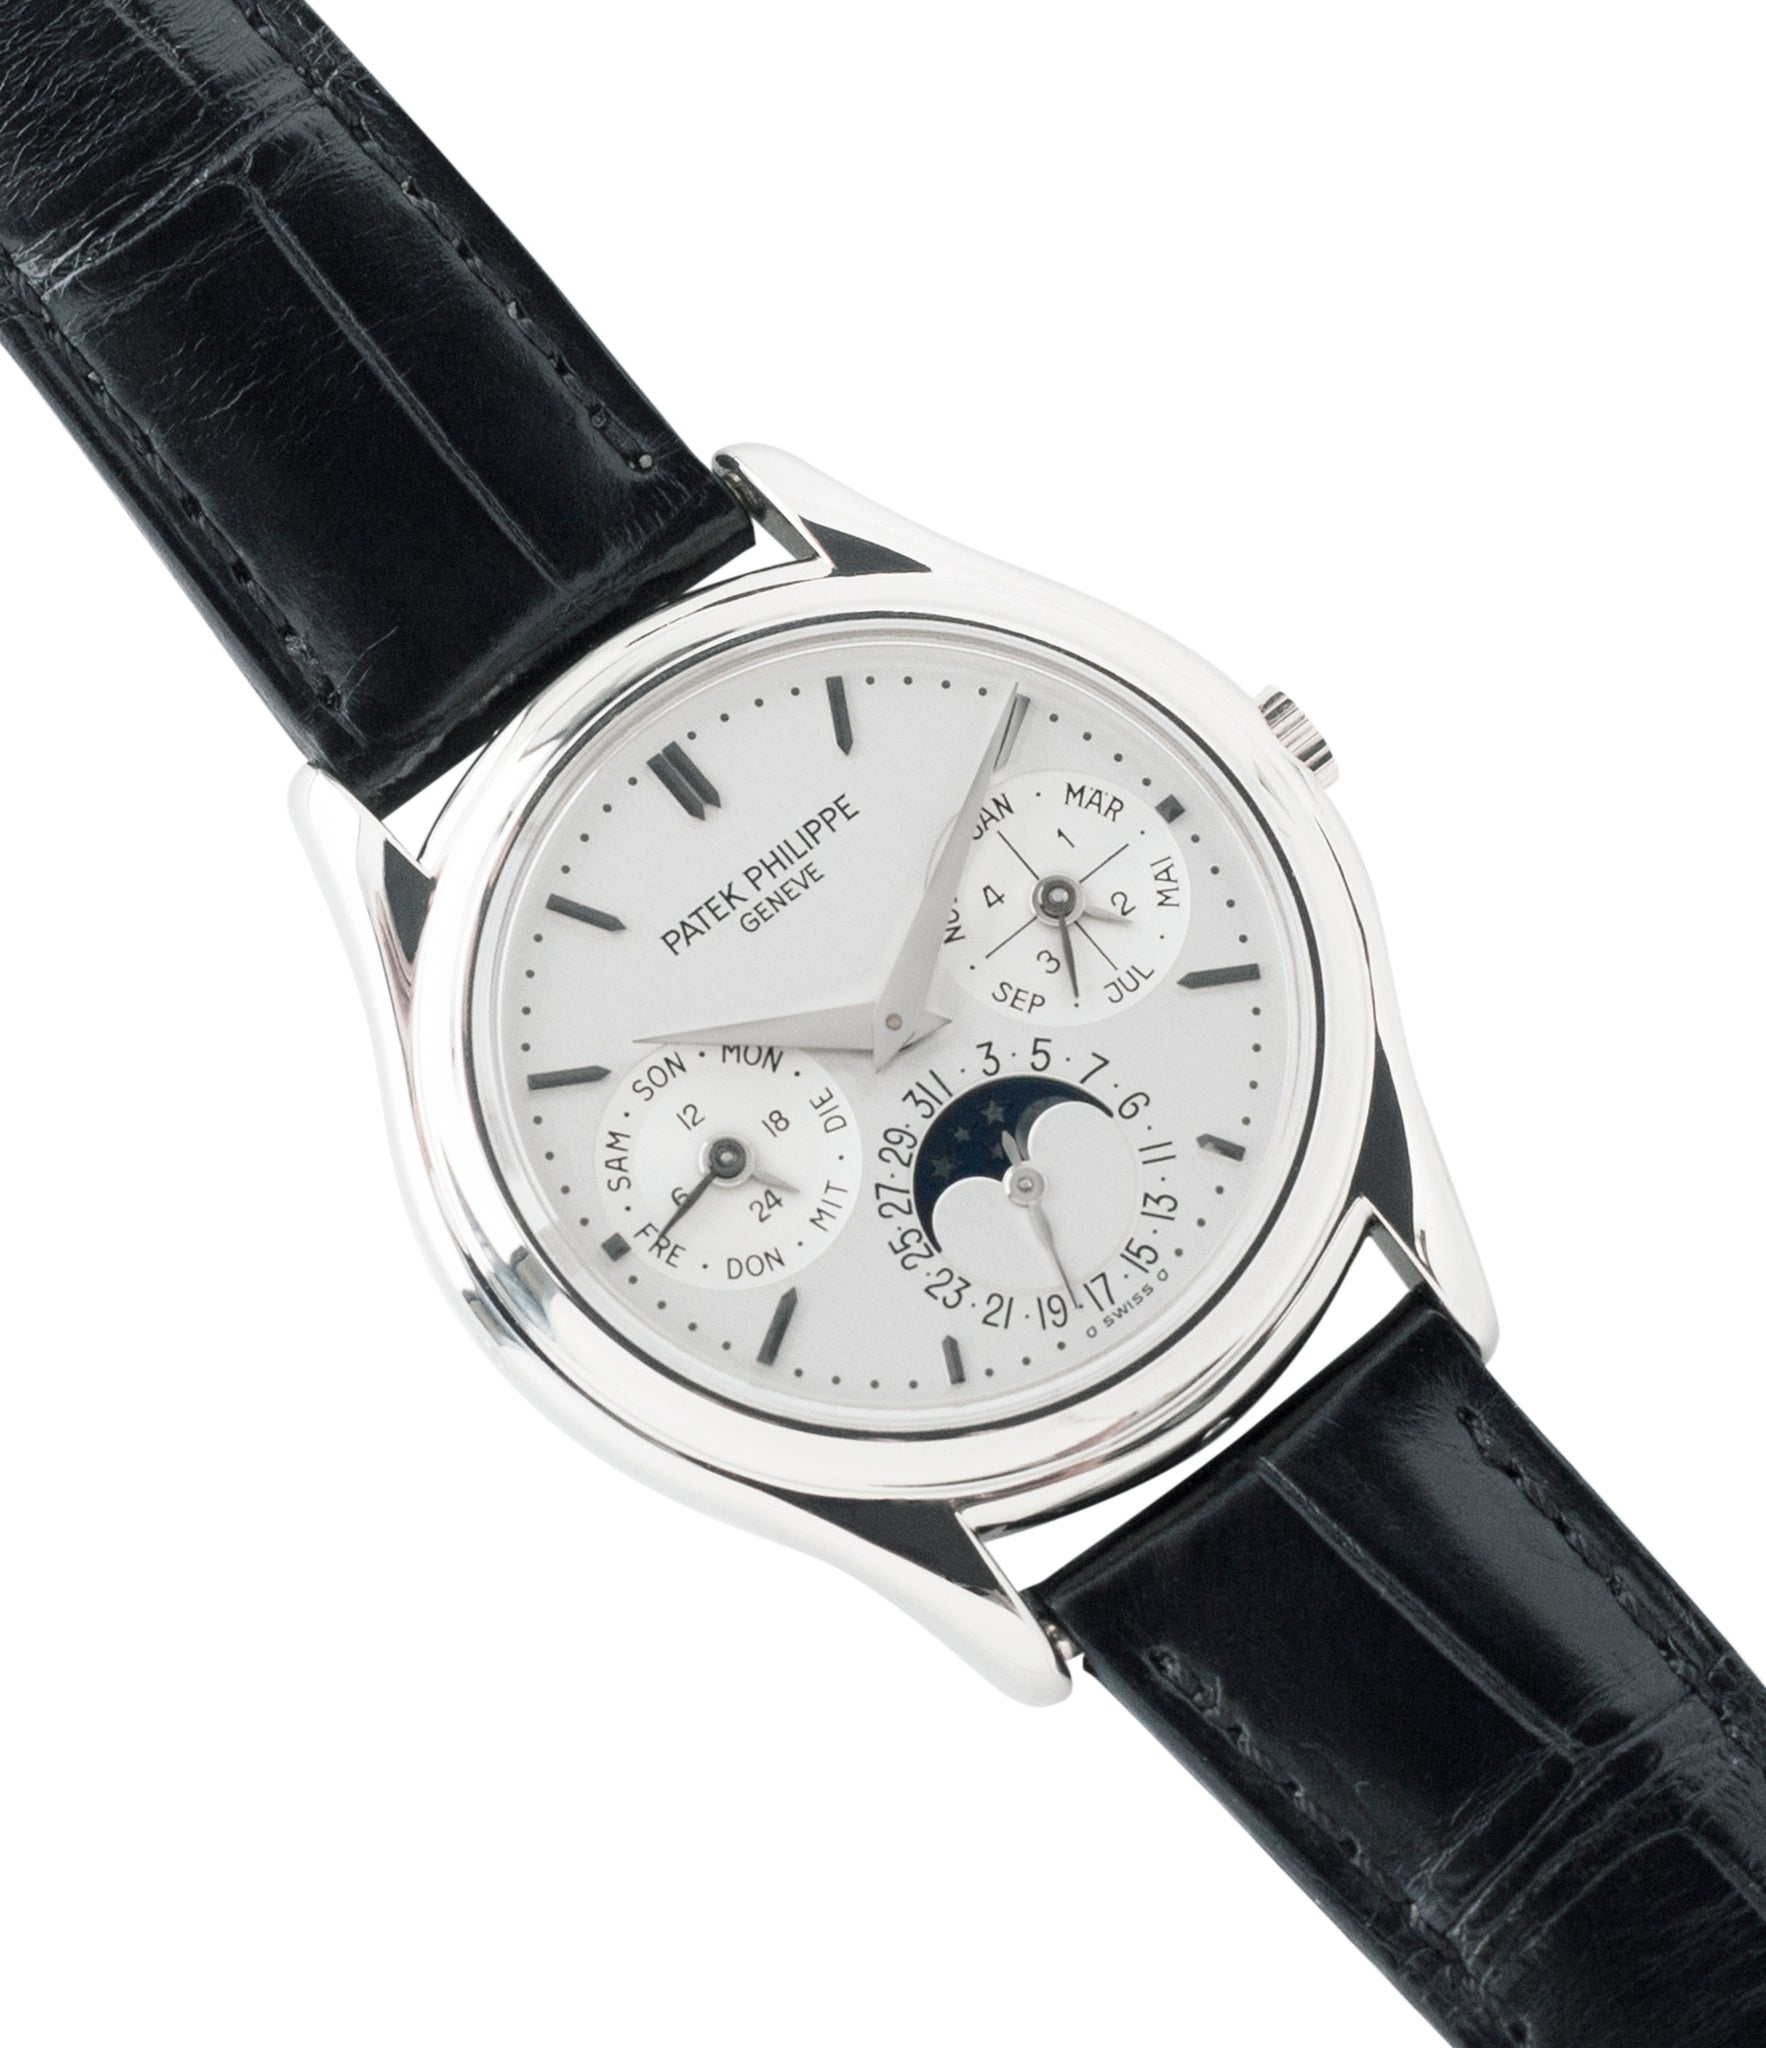 for sale Patek Philippe 3940G-017 Perpetual Calendar Moonphase white gold rare watch German dial full set online at A Collected Man London UK specialist rare luxury watches